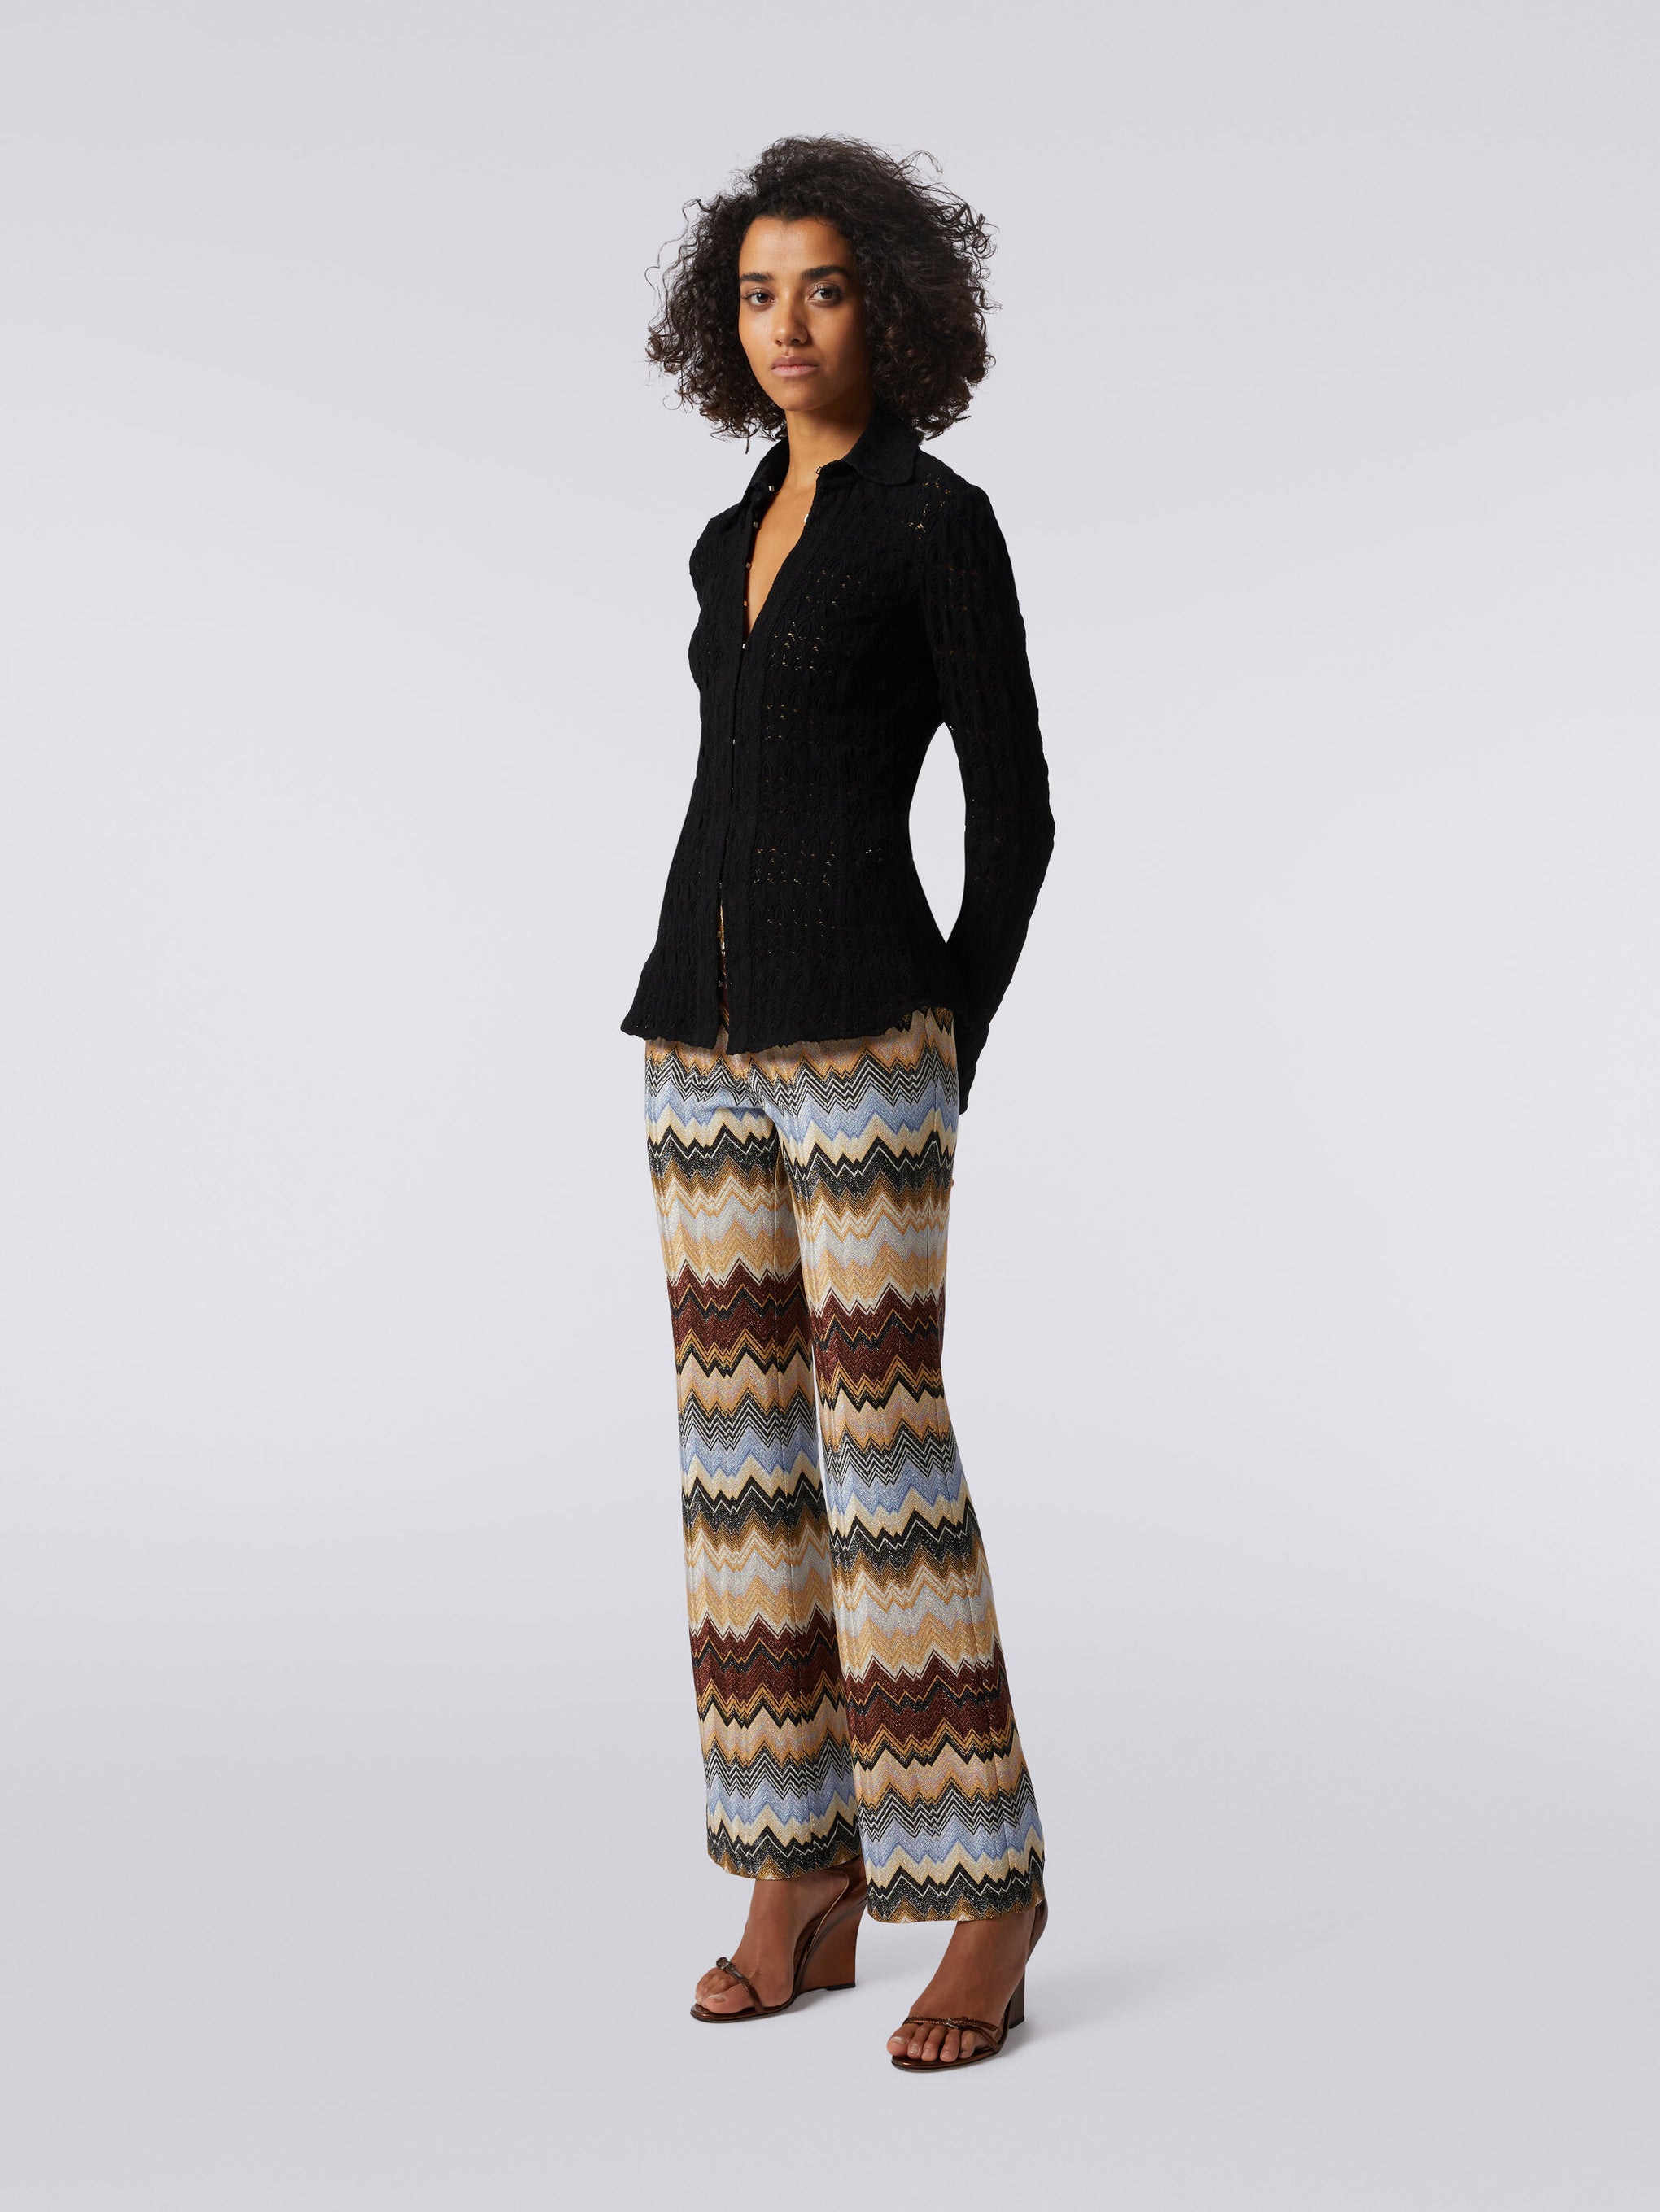 Missoni Trouser in Irregular Brown Multicoloured available at The New Trend Australia.